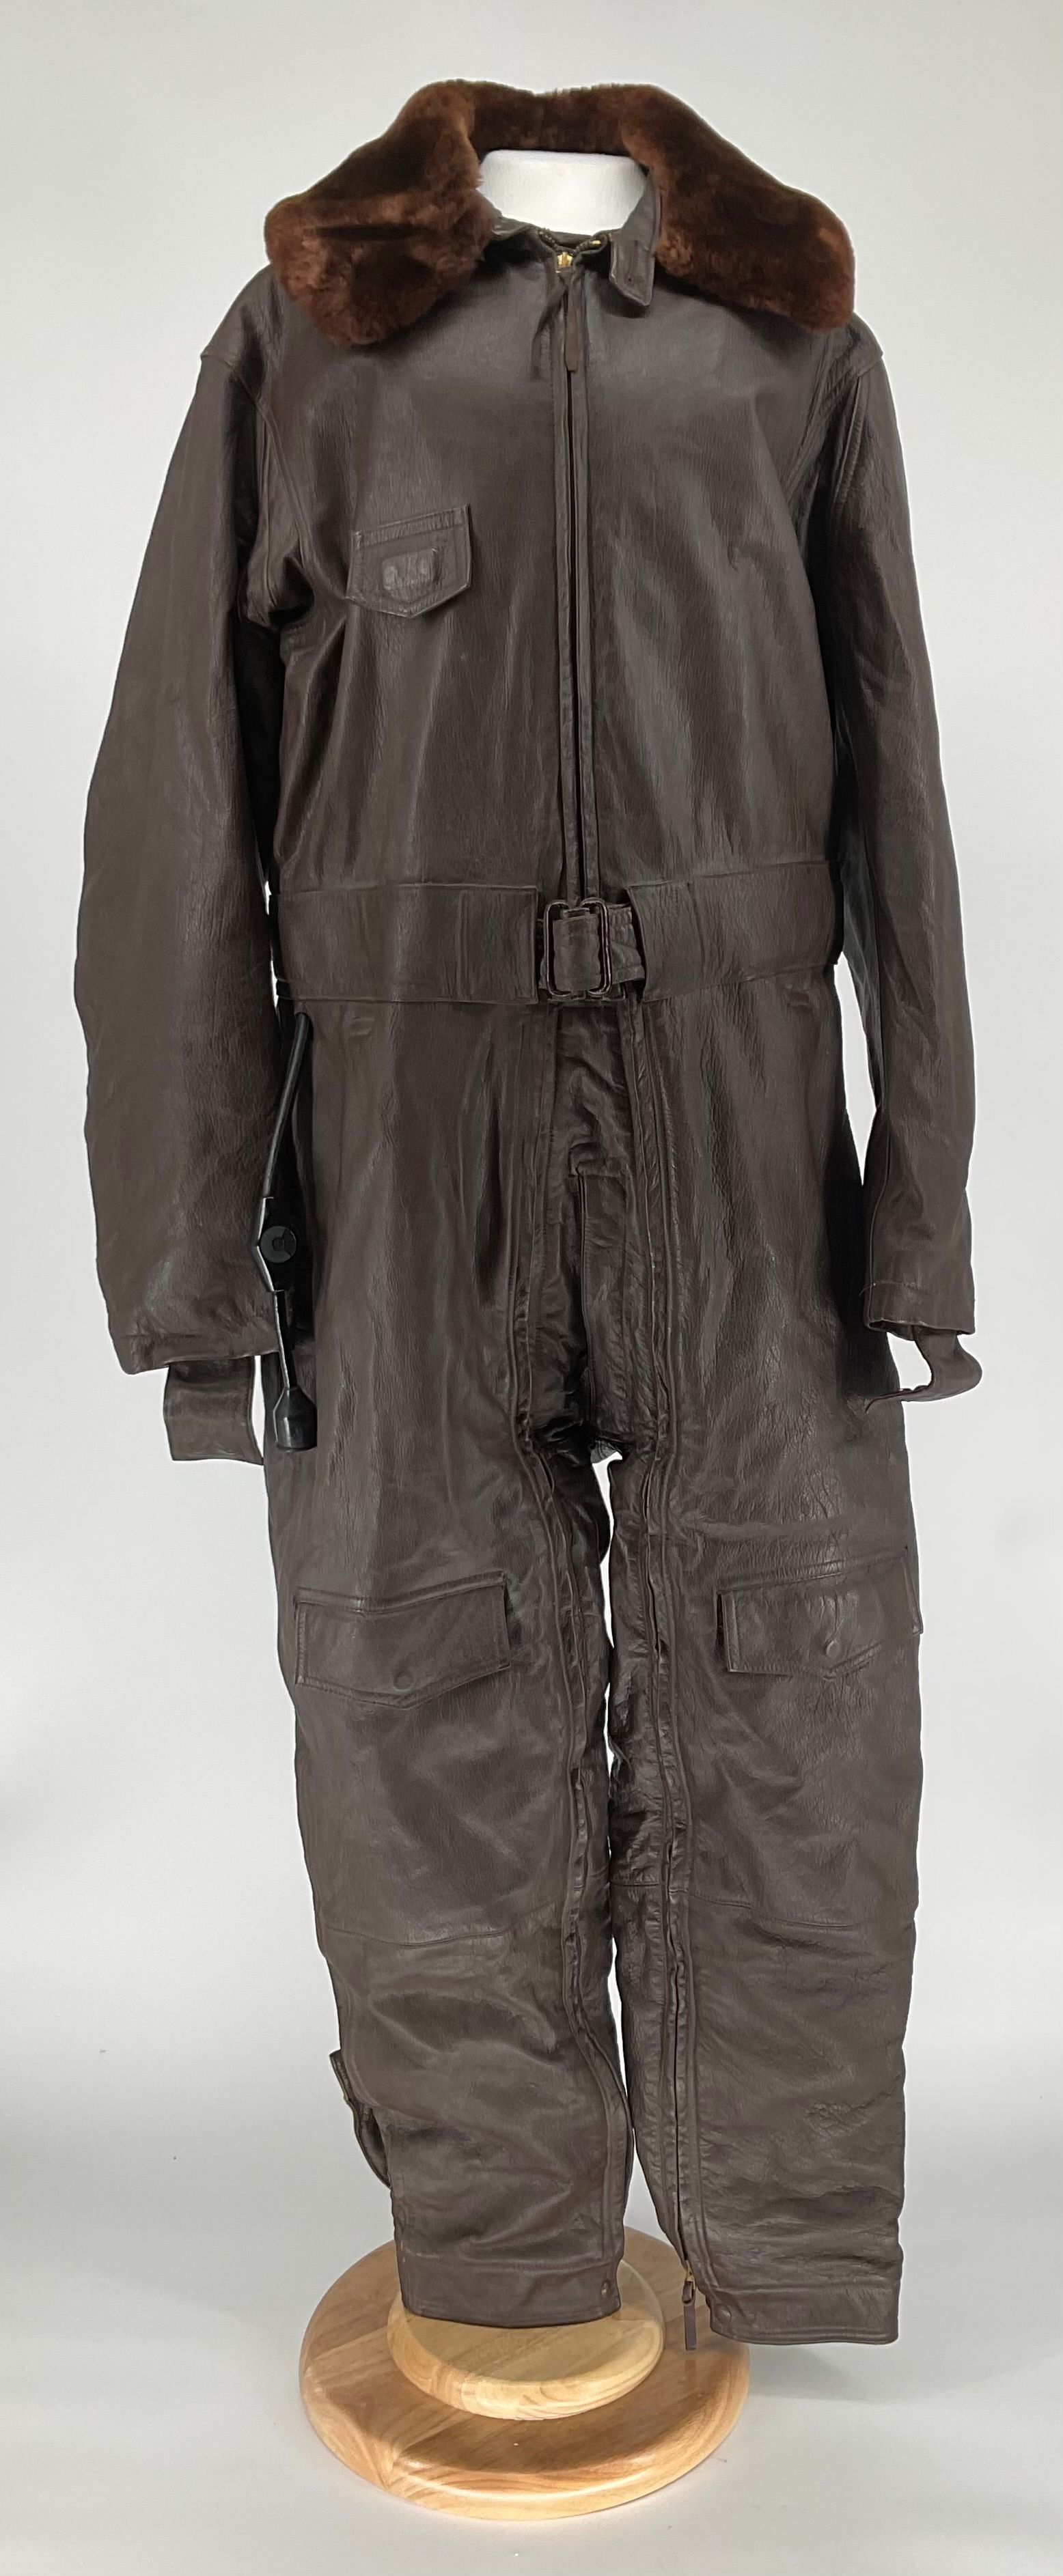 Primary Image of Electrically Heated Winter Flight Suit